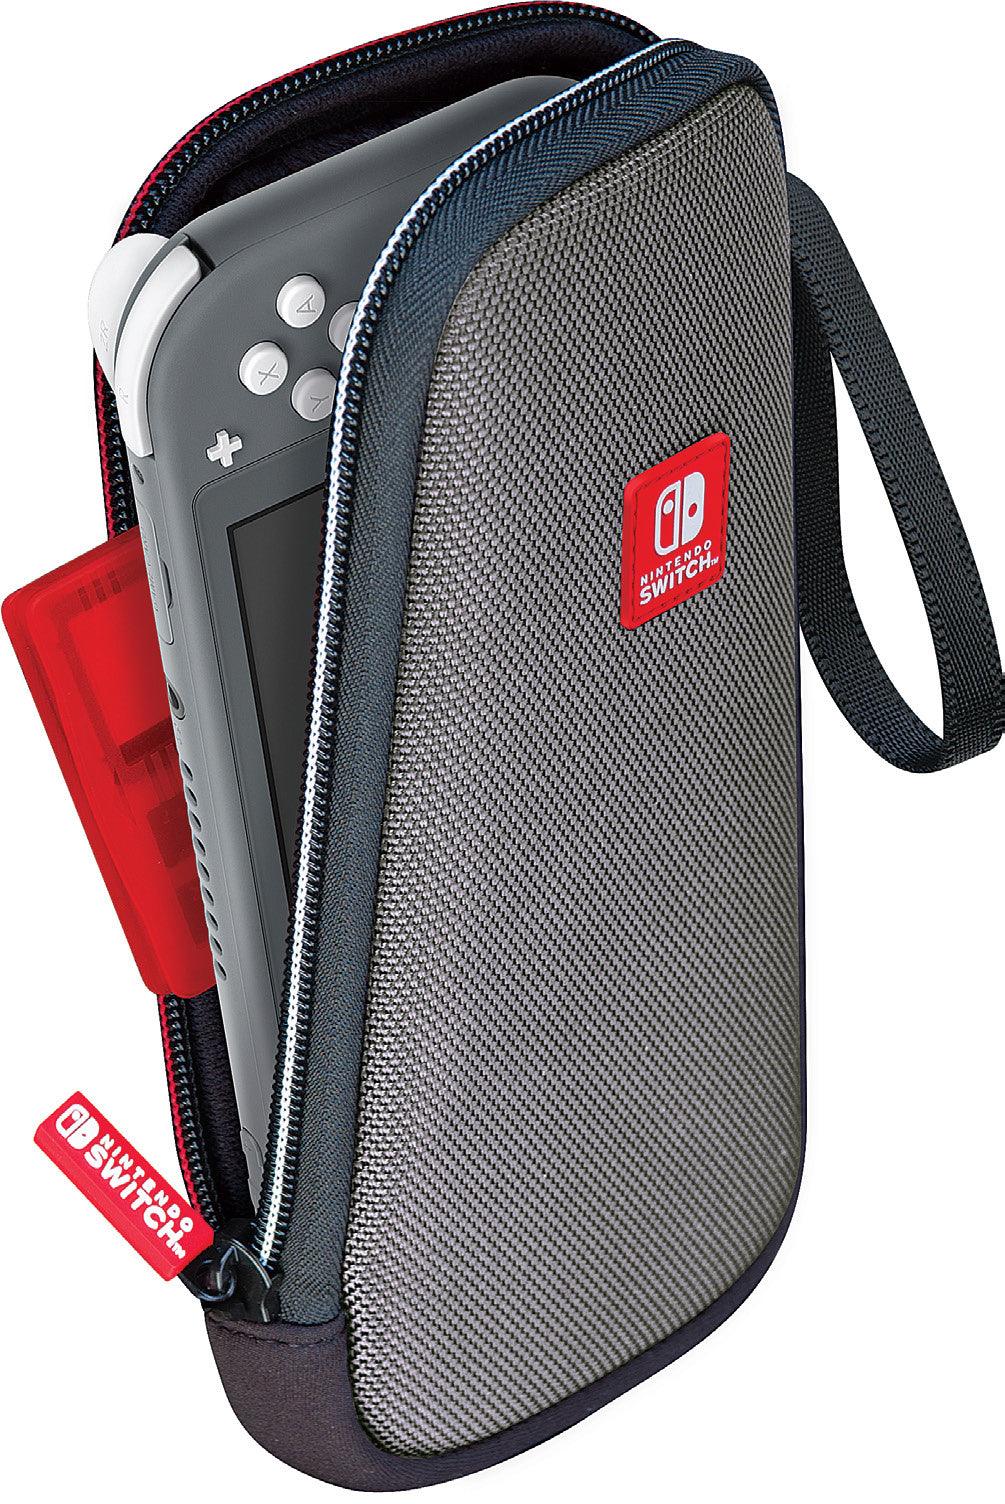 Nsl Official Travel Pouch - Want a New Gadget